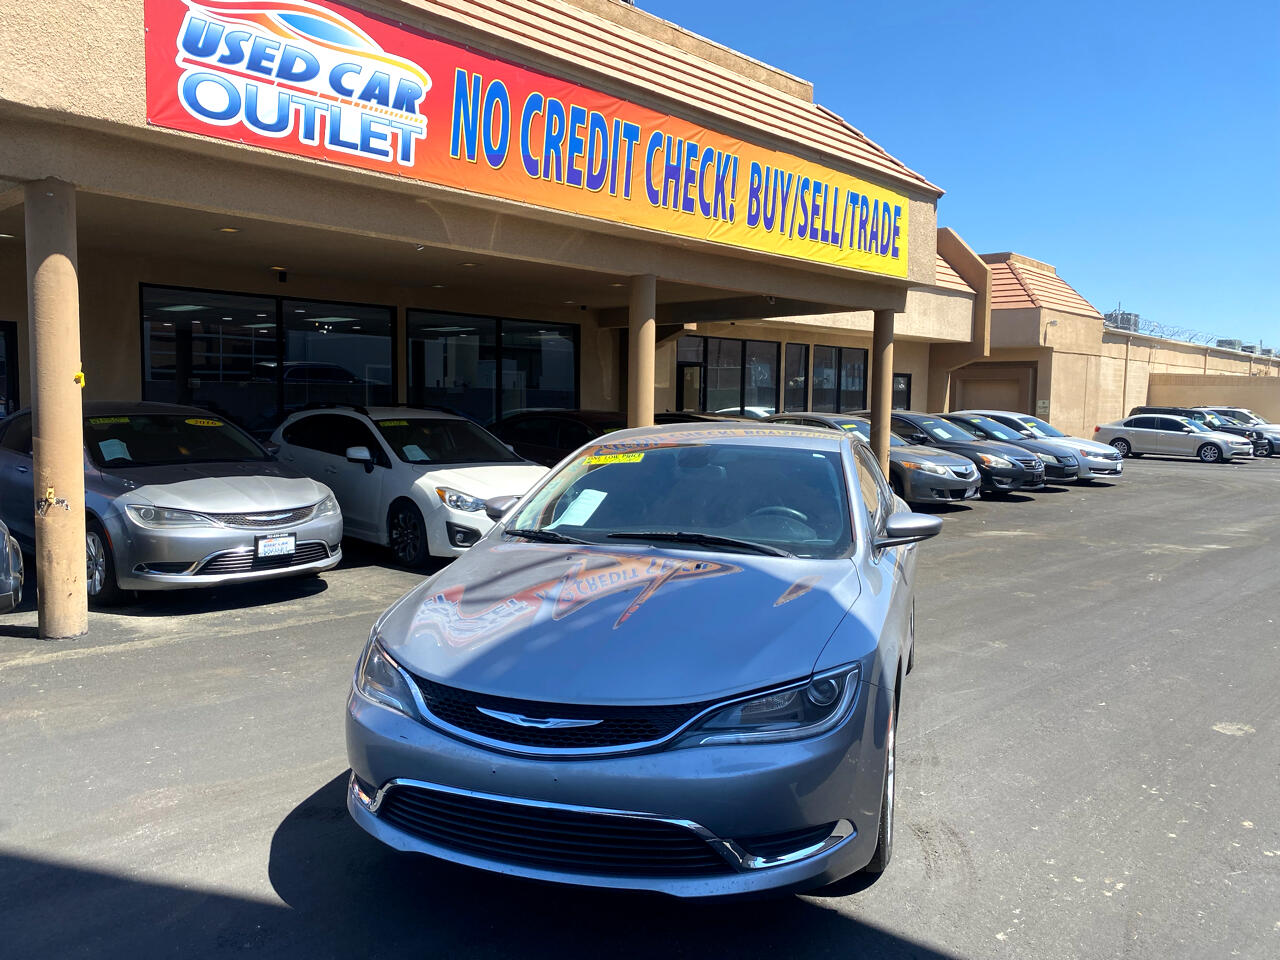 Chrysler 200 4dr Sdn Limited FWD 2015